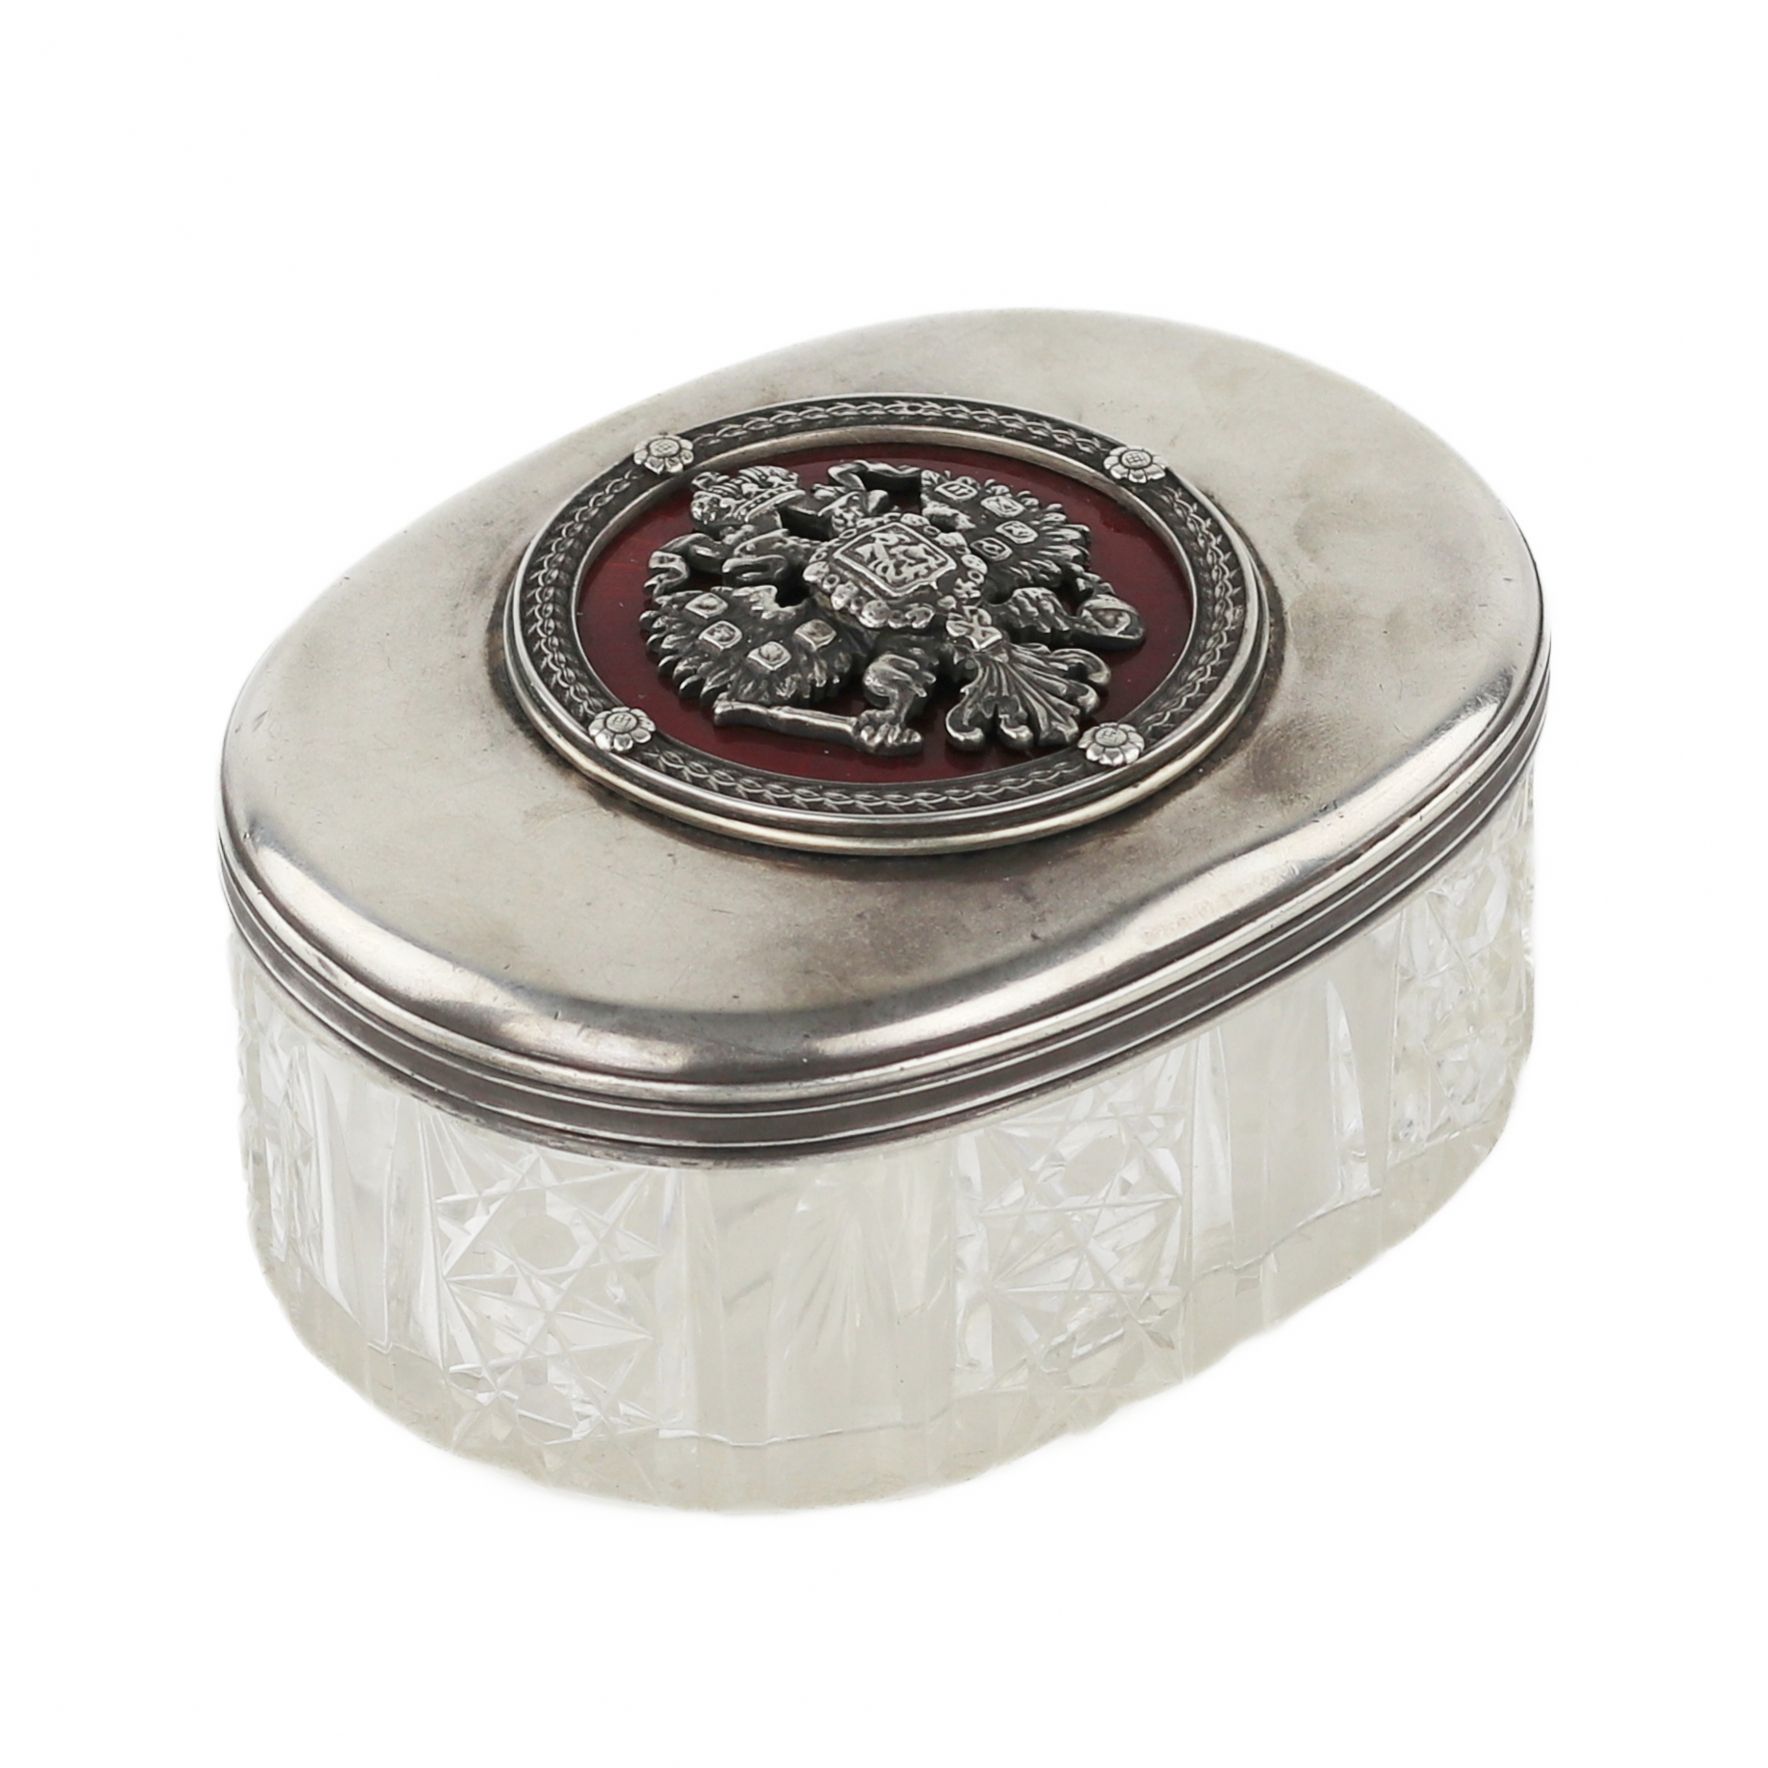 Crystal box in silver with the coat of arms of Russia on the lid. Early 20th century. - Image 2 of 6